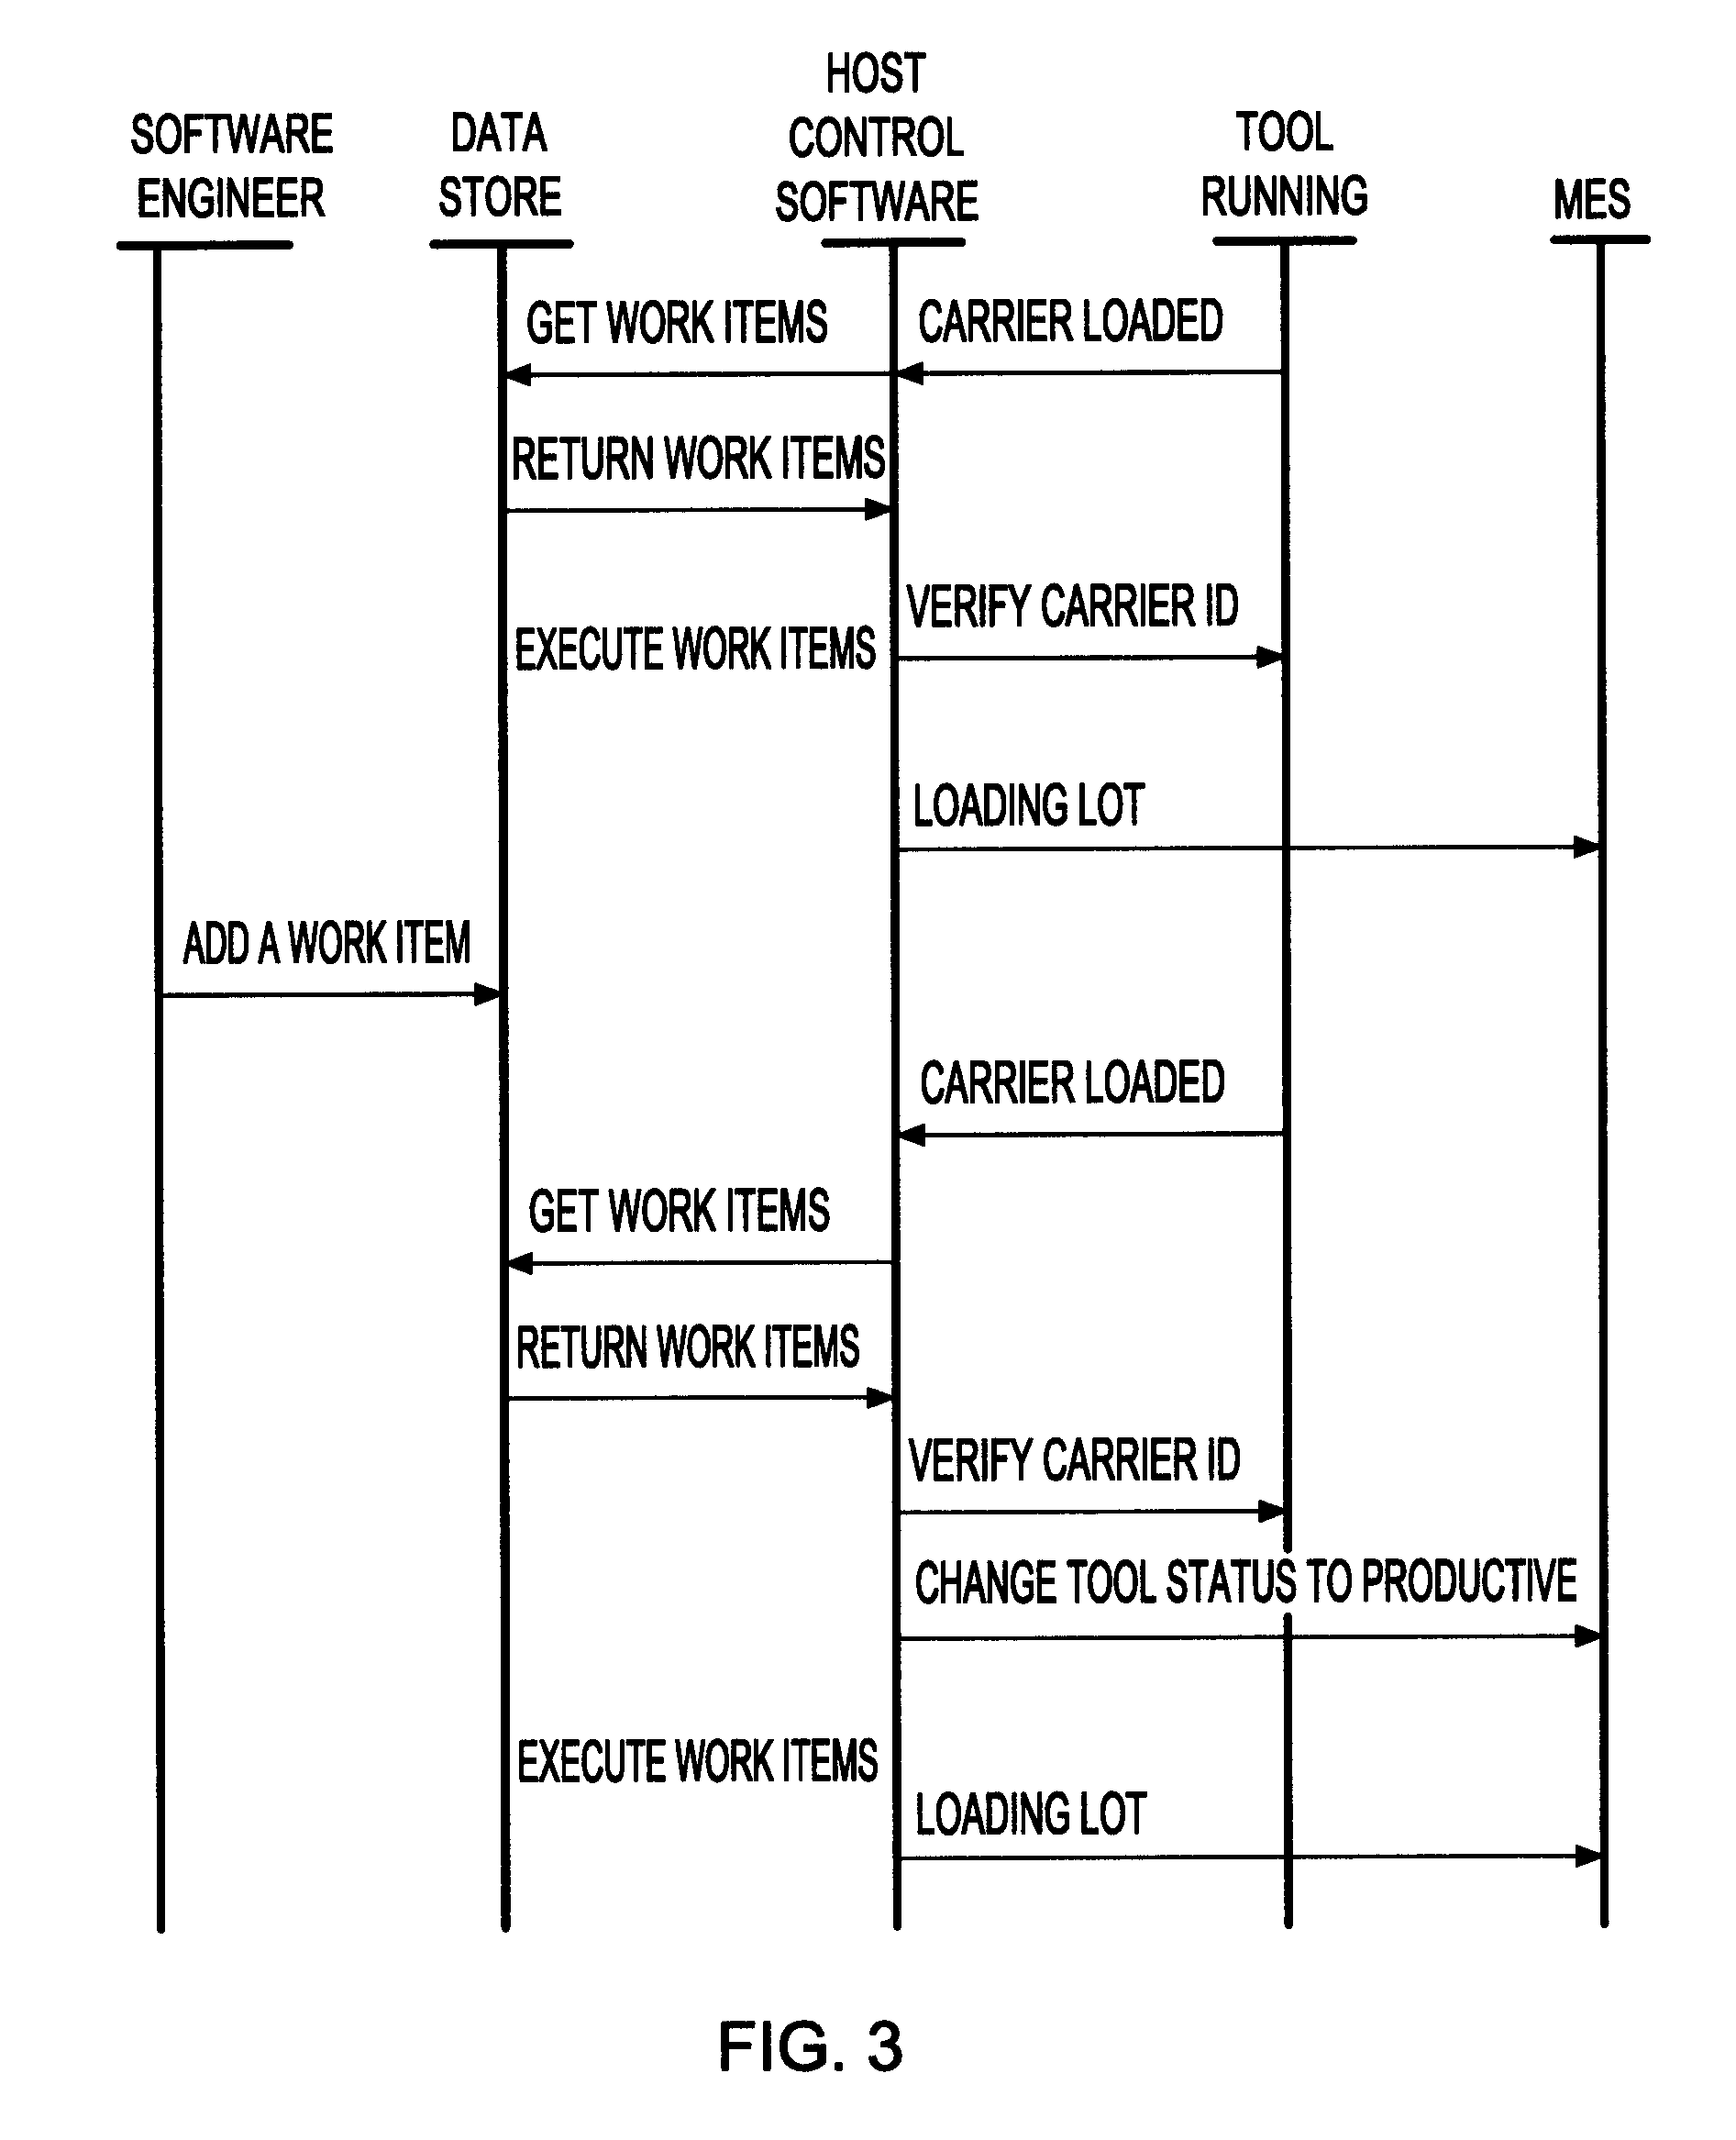 Host control for a variety of tools in semiconductor fabs